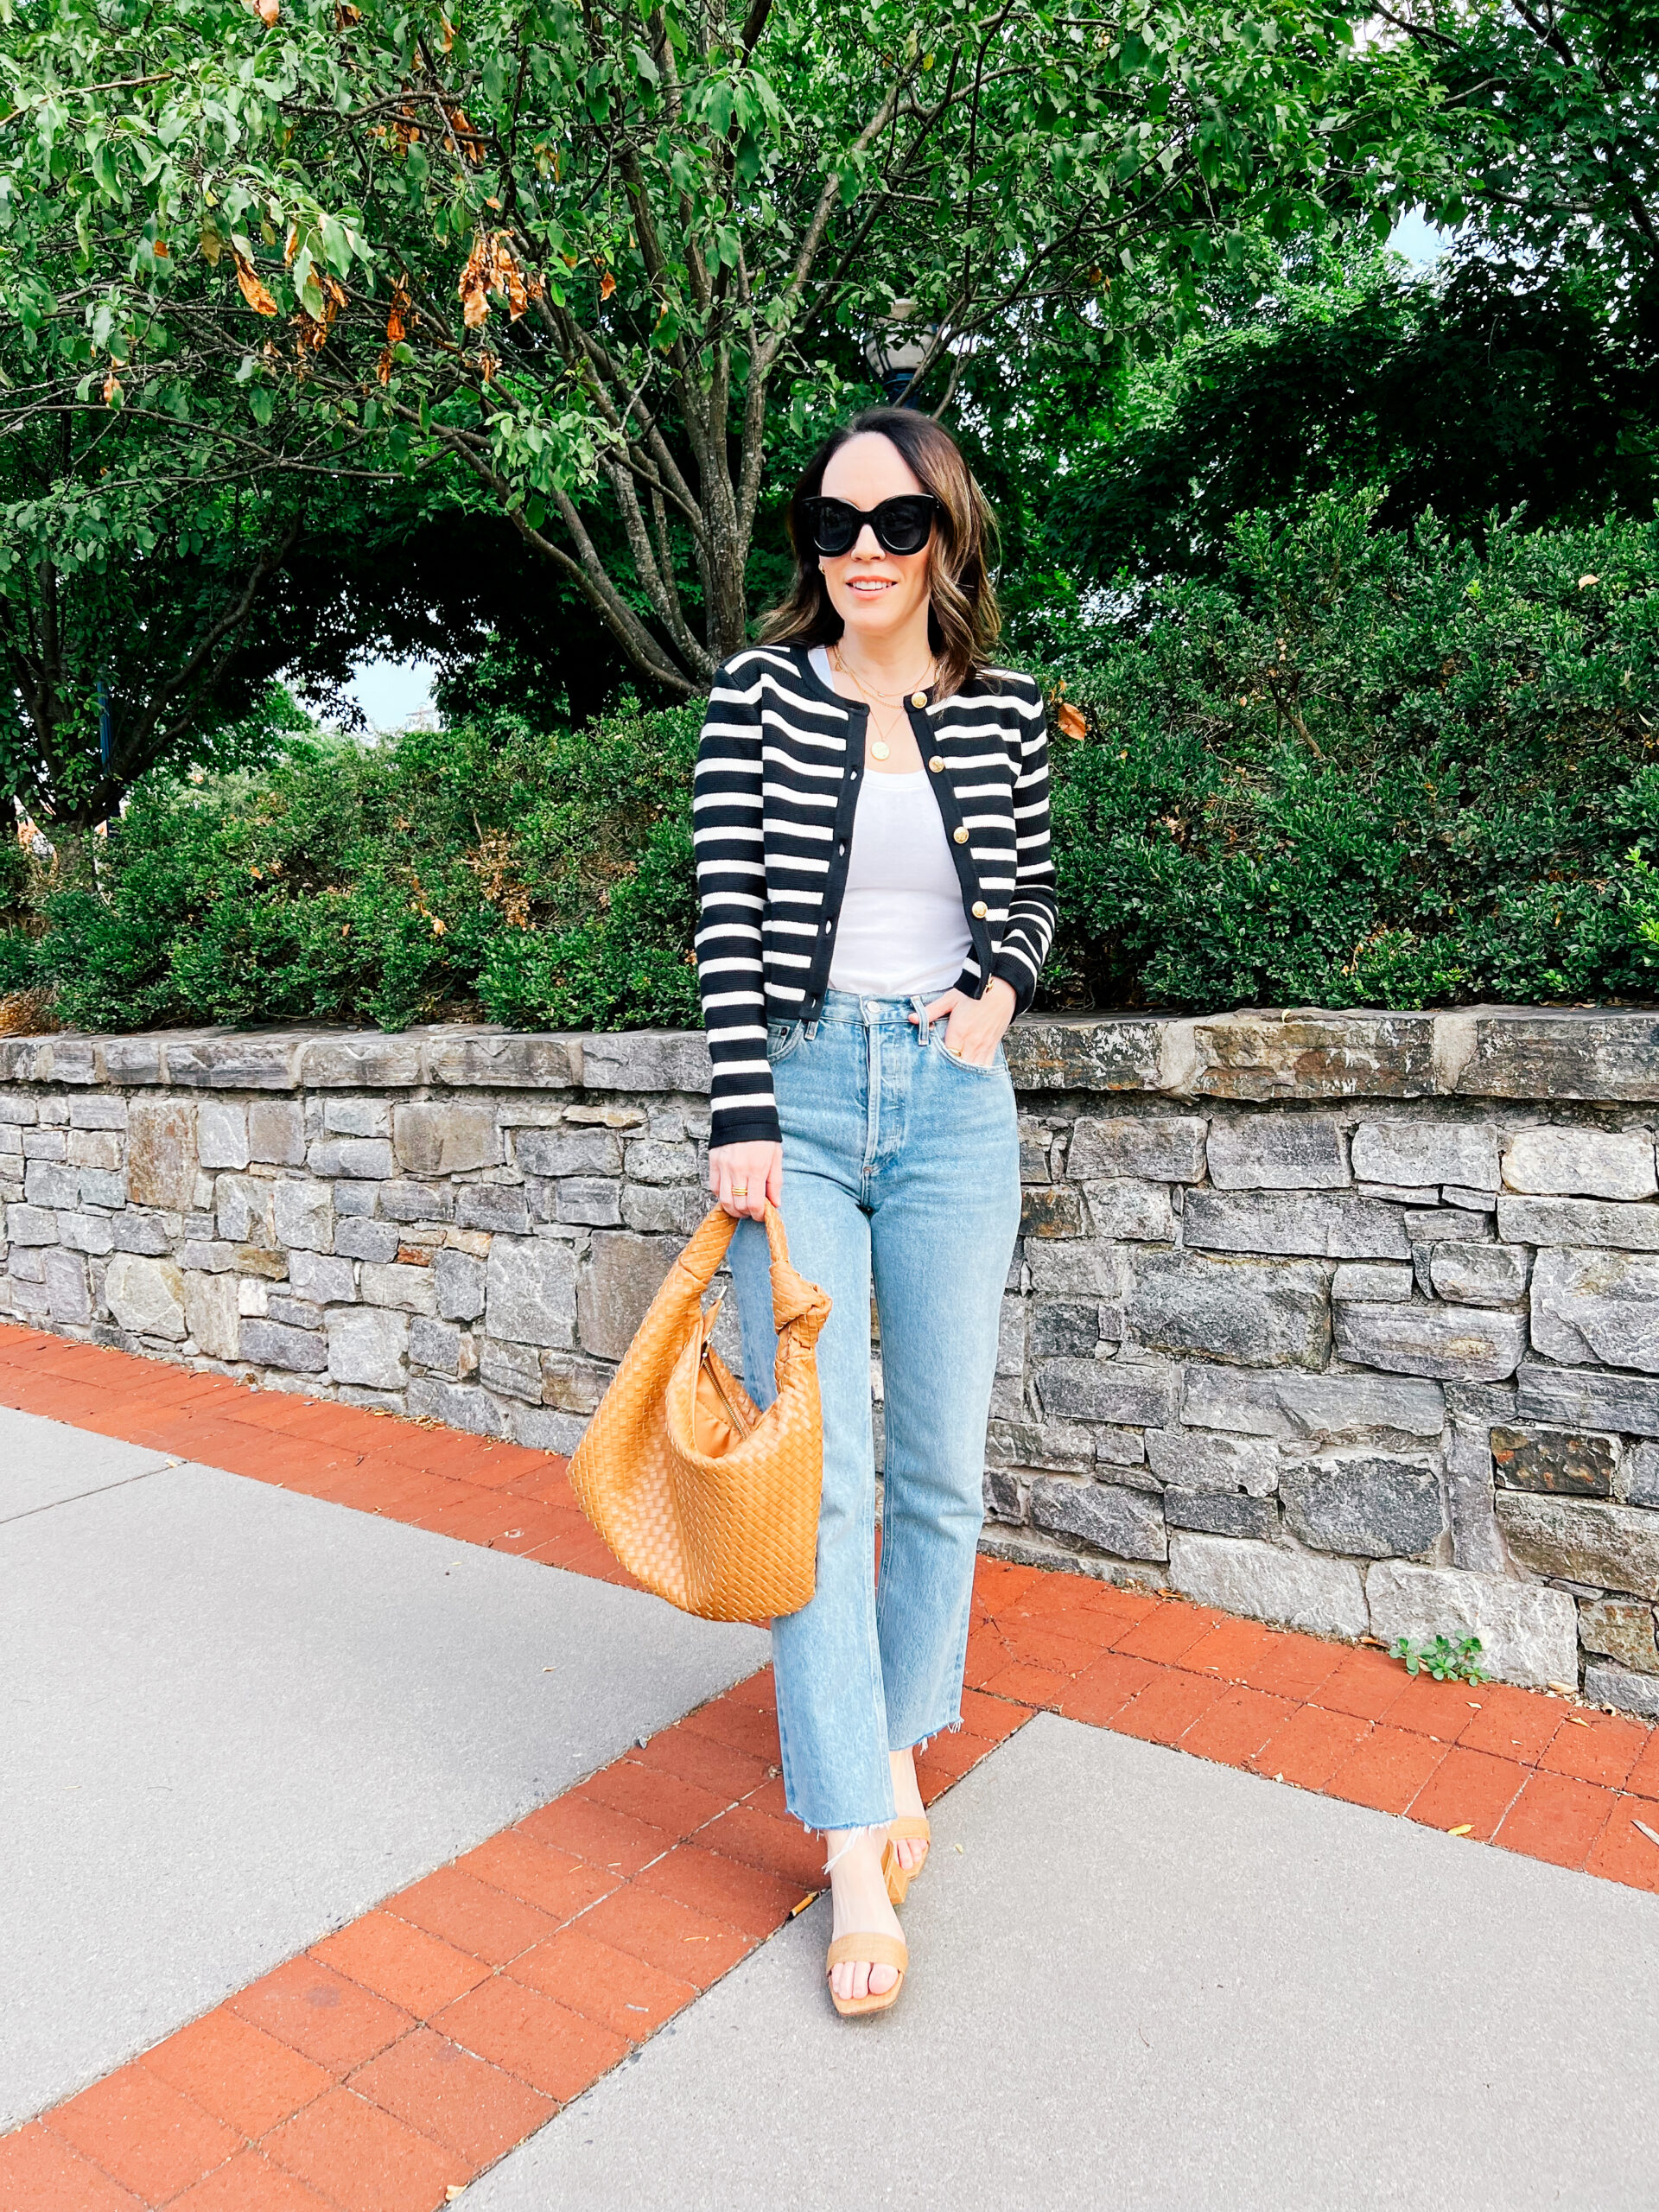 Maree Sye sharing her Outfits I Wore - August 2023 in striped sweater, white top, and denim jeans